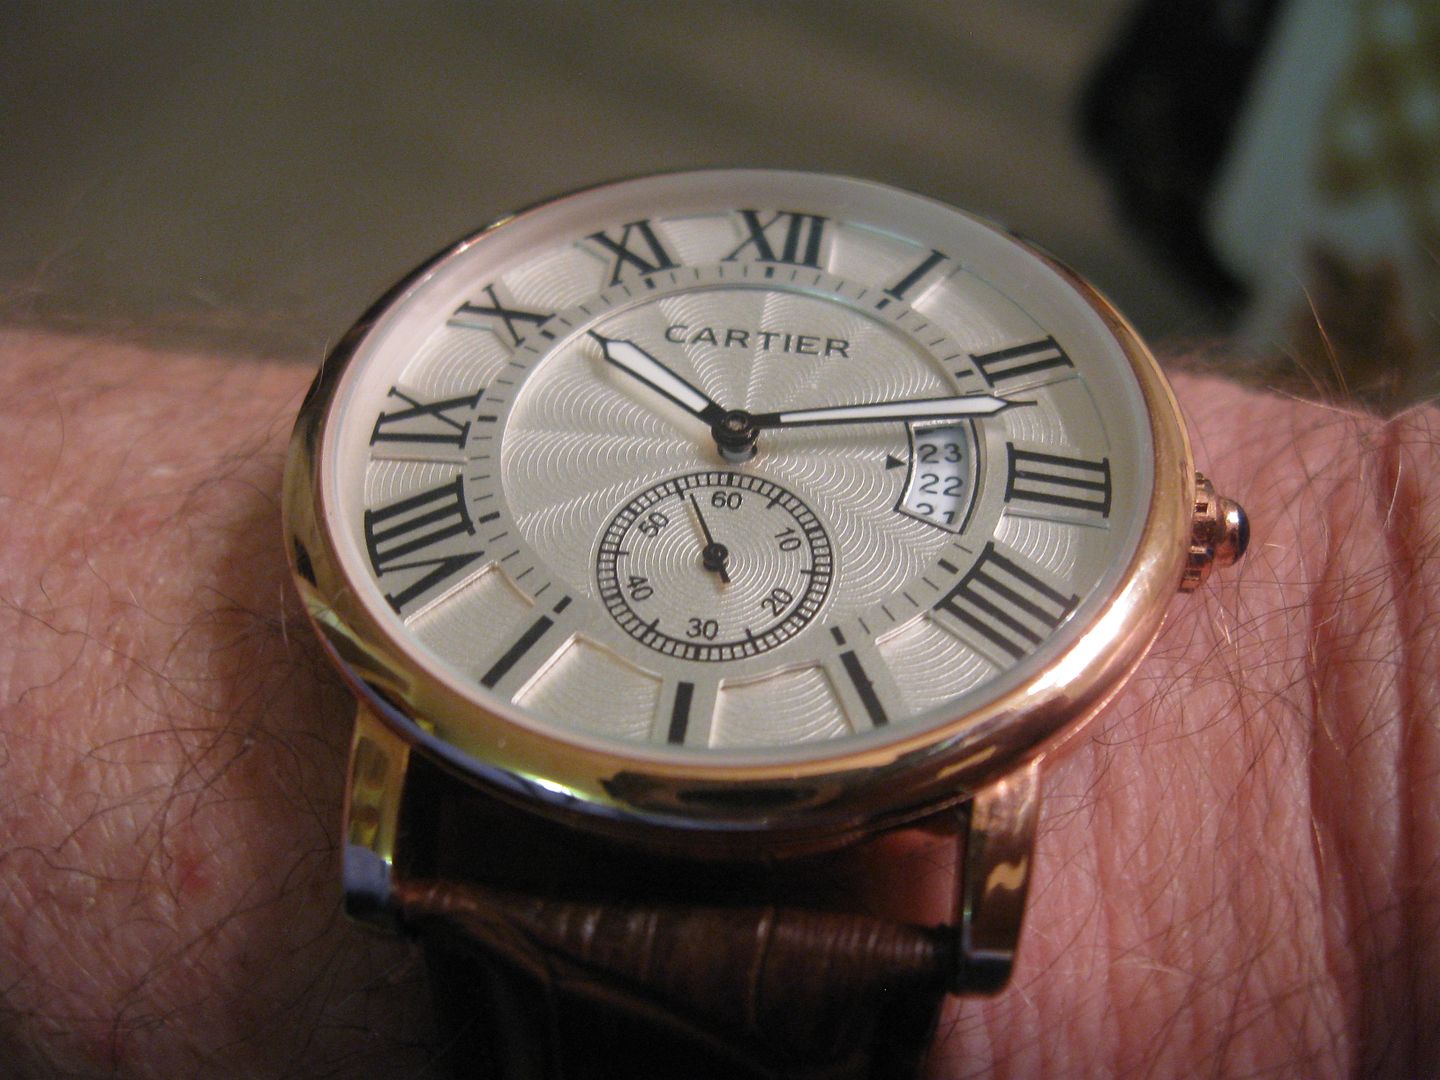 CARTIER.Small.Sec.Dial.%20on%20allegator